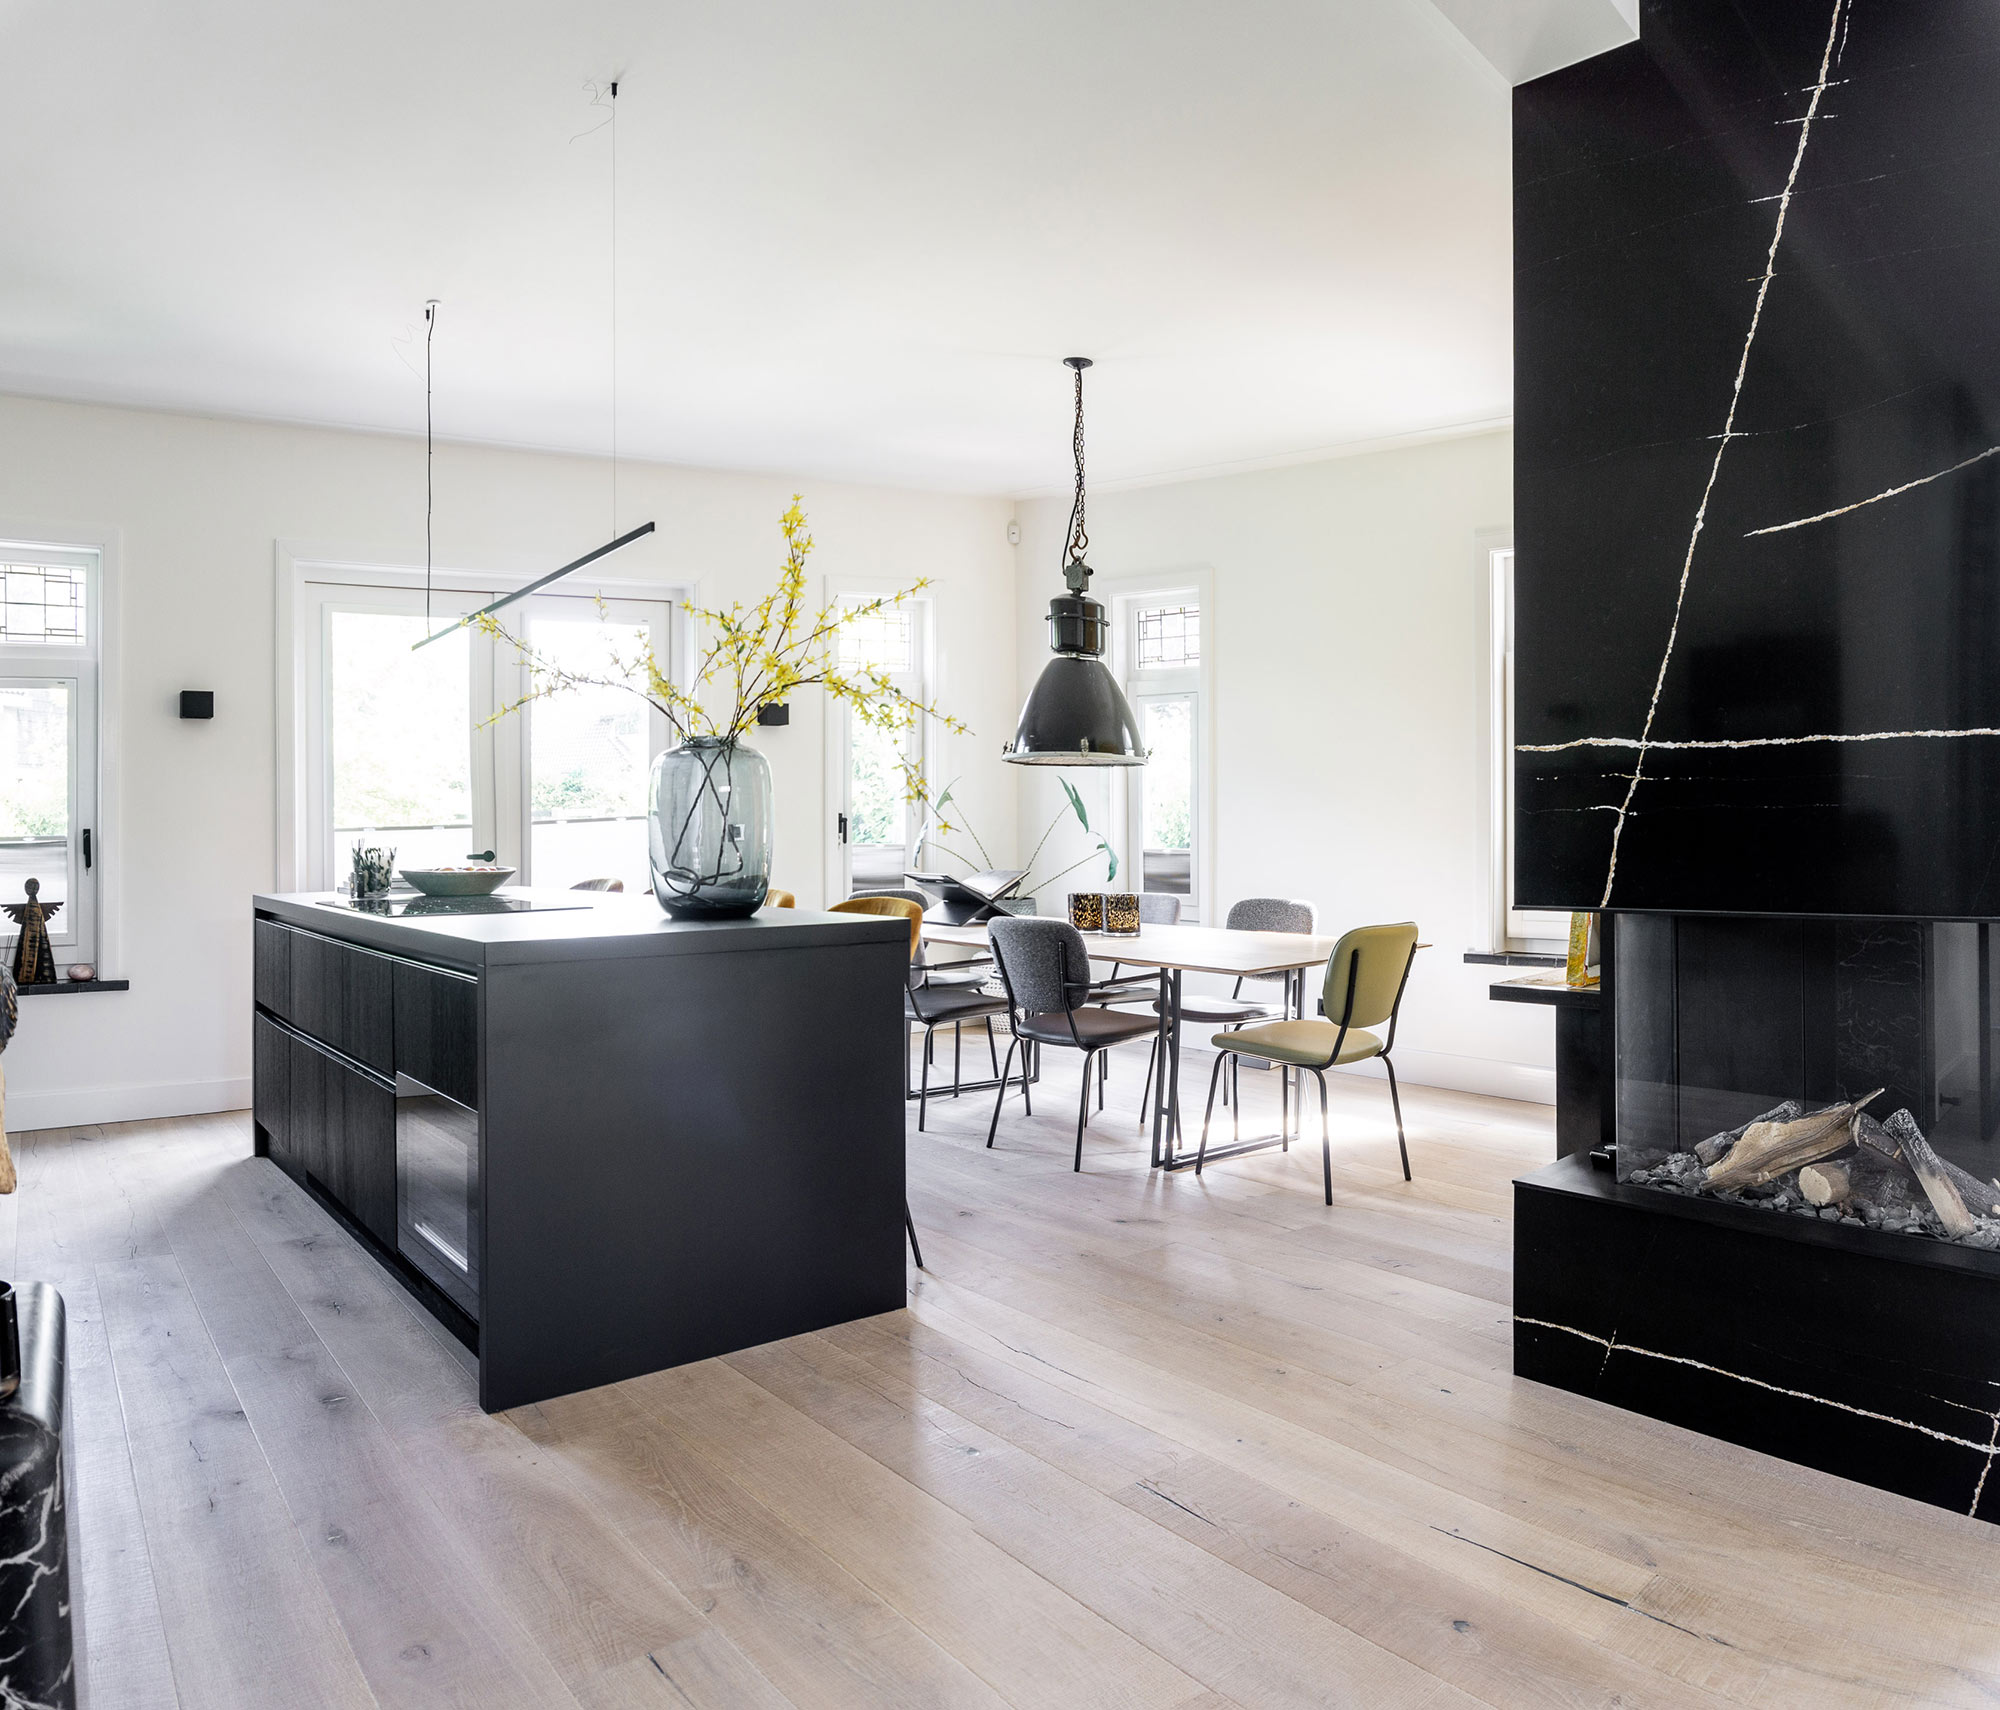 Image of Plantagie 6 in The transformation of a coastal New Zealand family home full of personality - Cosentino